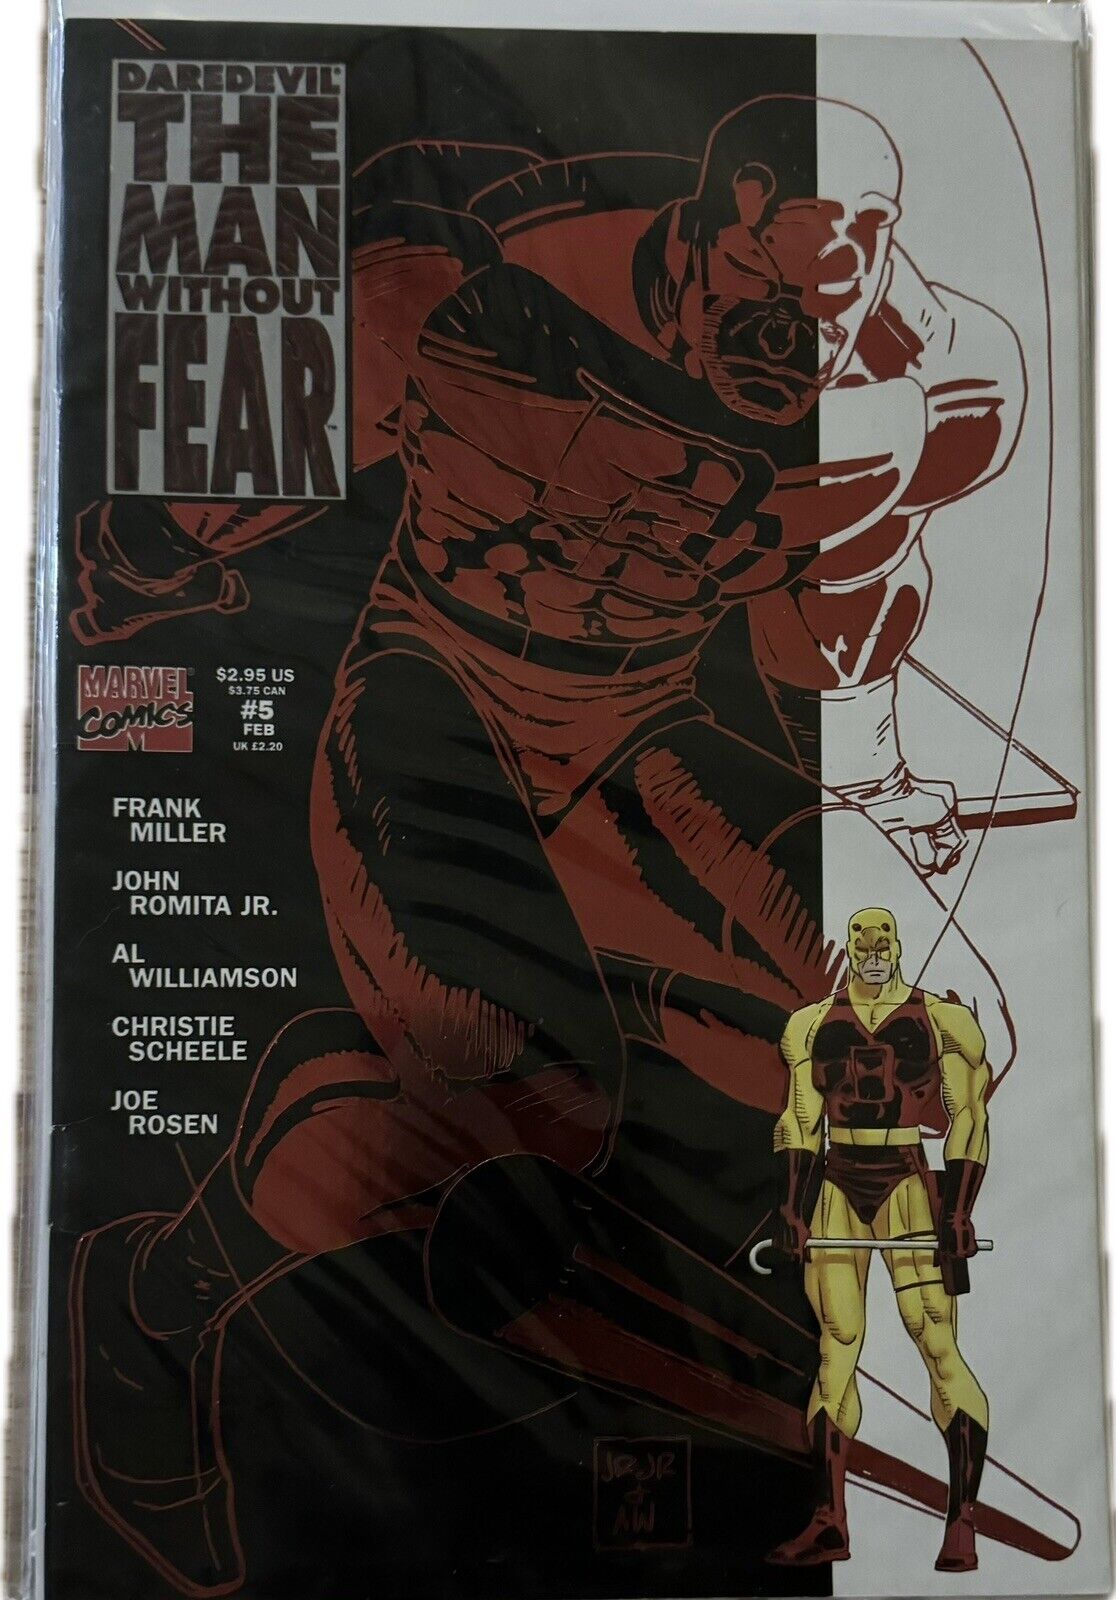 Daredevil the Man Without Fear #5 (Marvel Comics February 1994)